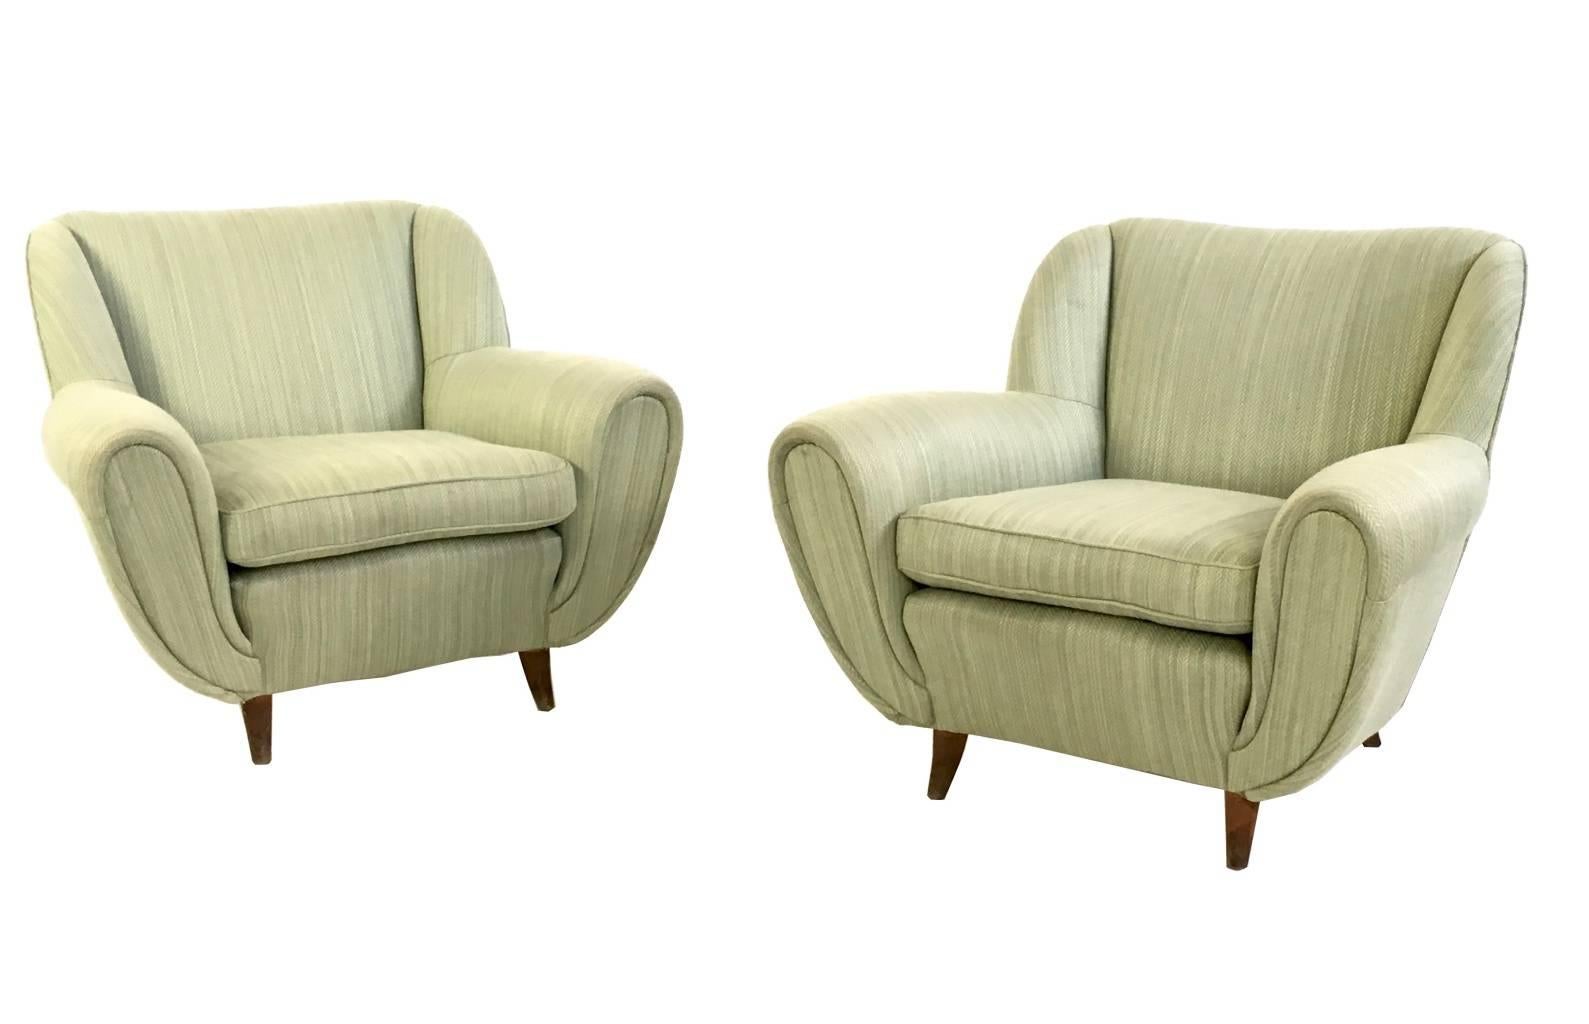 Made in Italy, 1950s. 
They feature a wooden structure, which is padded and upholstered in light green fabric.
These armchairs are vintage therefore they might show slight traces of use, but they can be considered as in excellent original condition